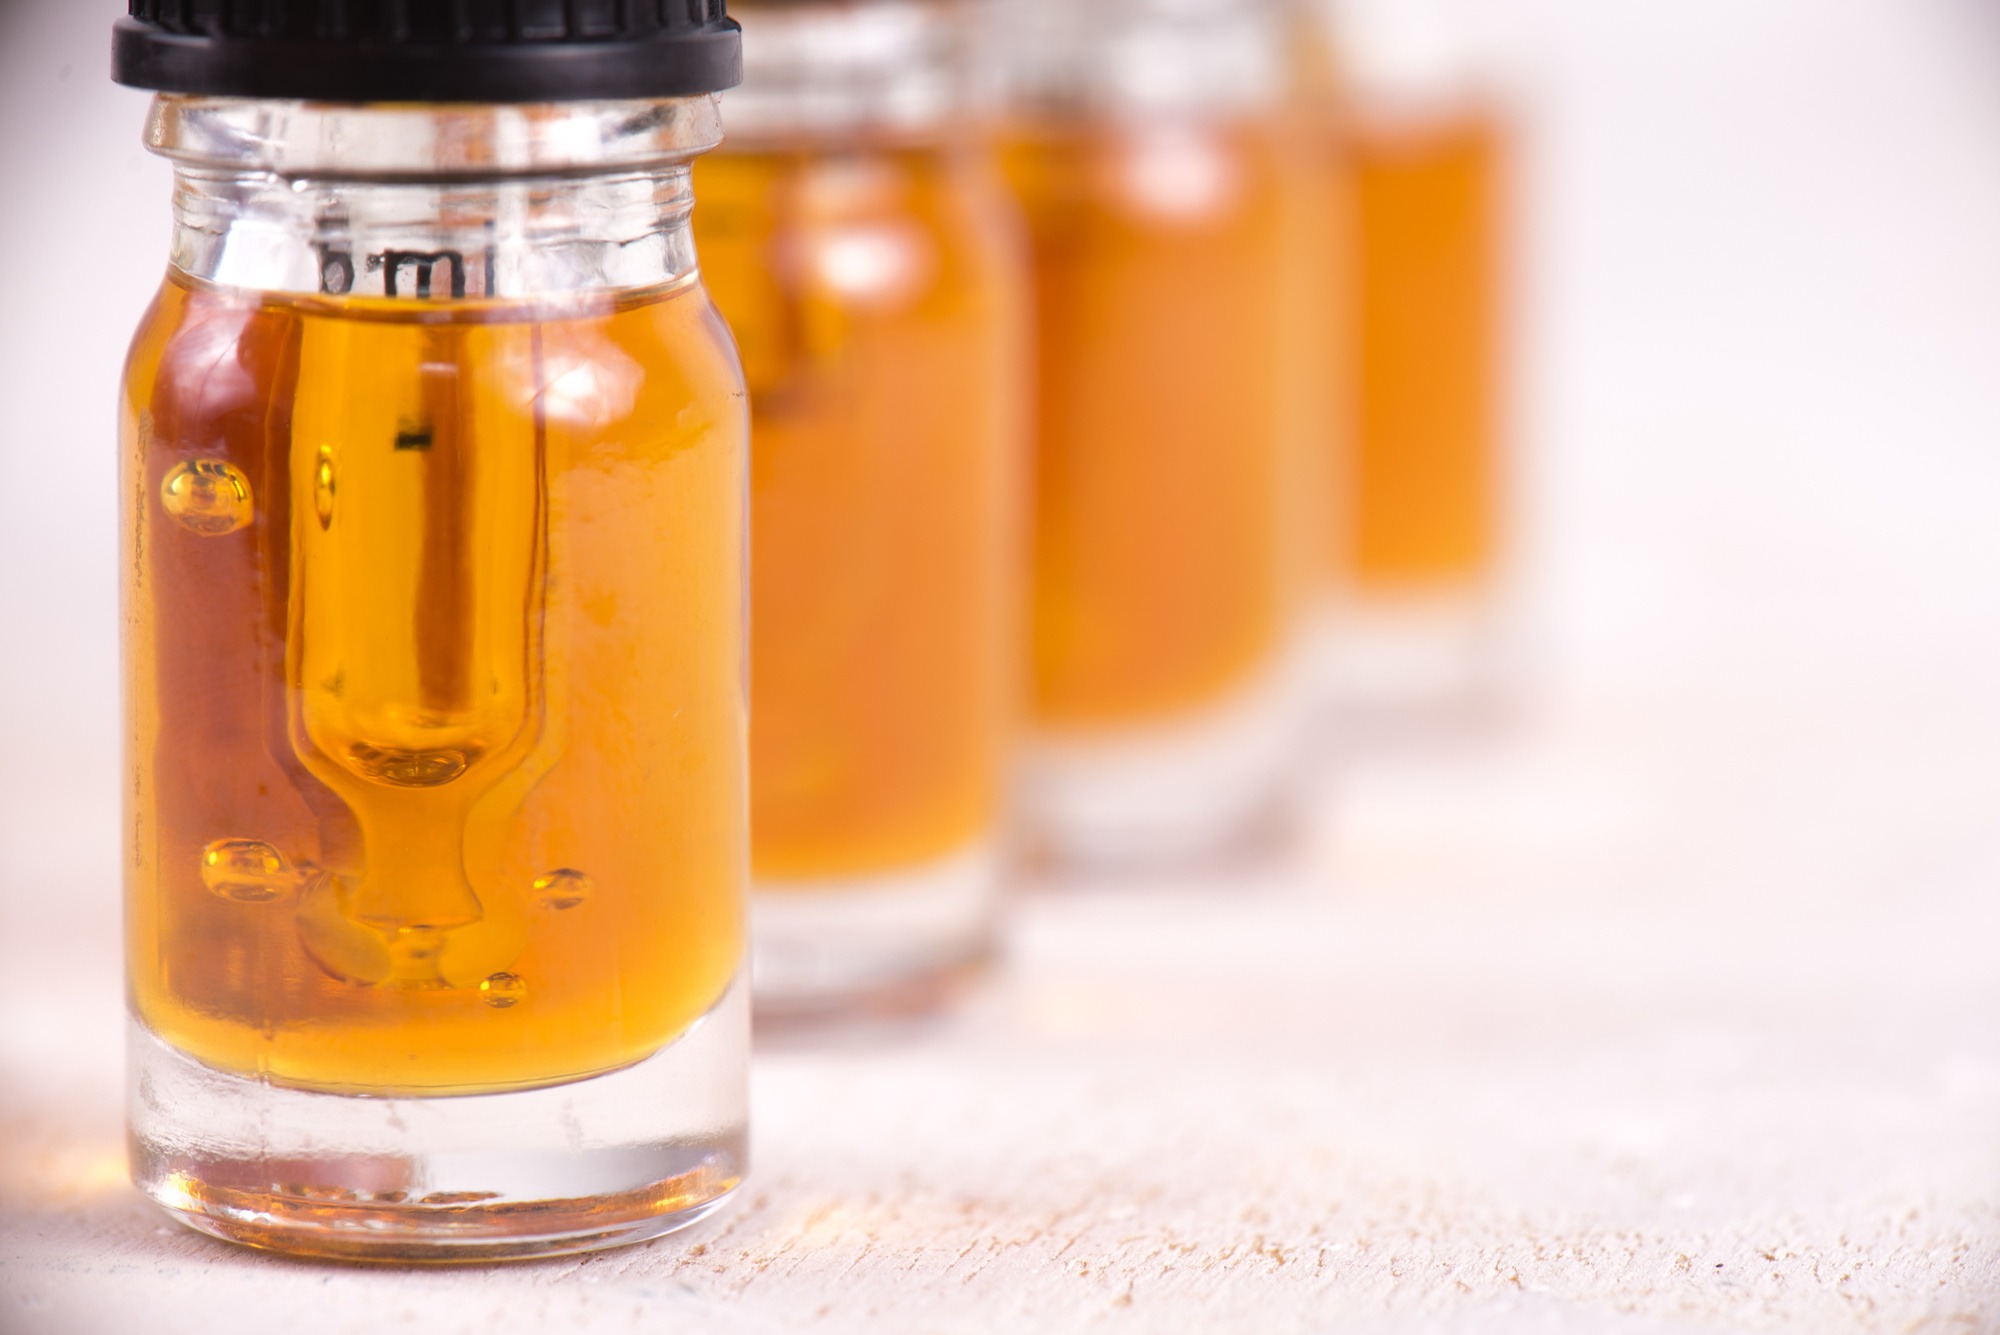 Does CBD Hemp Oil Get You High? An introduction to